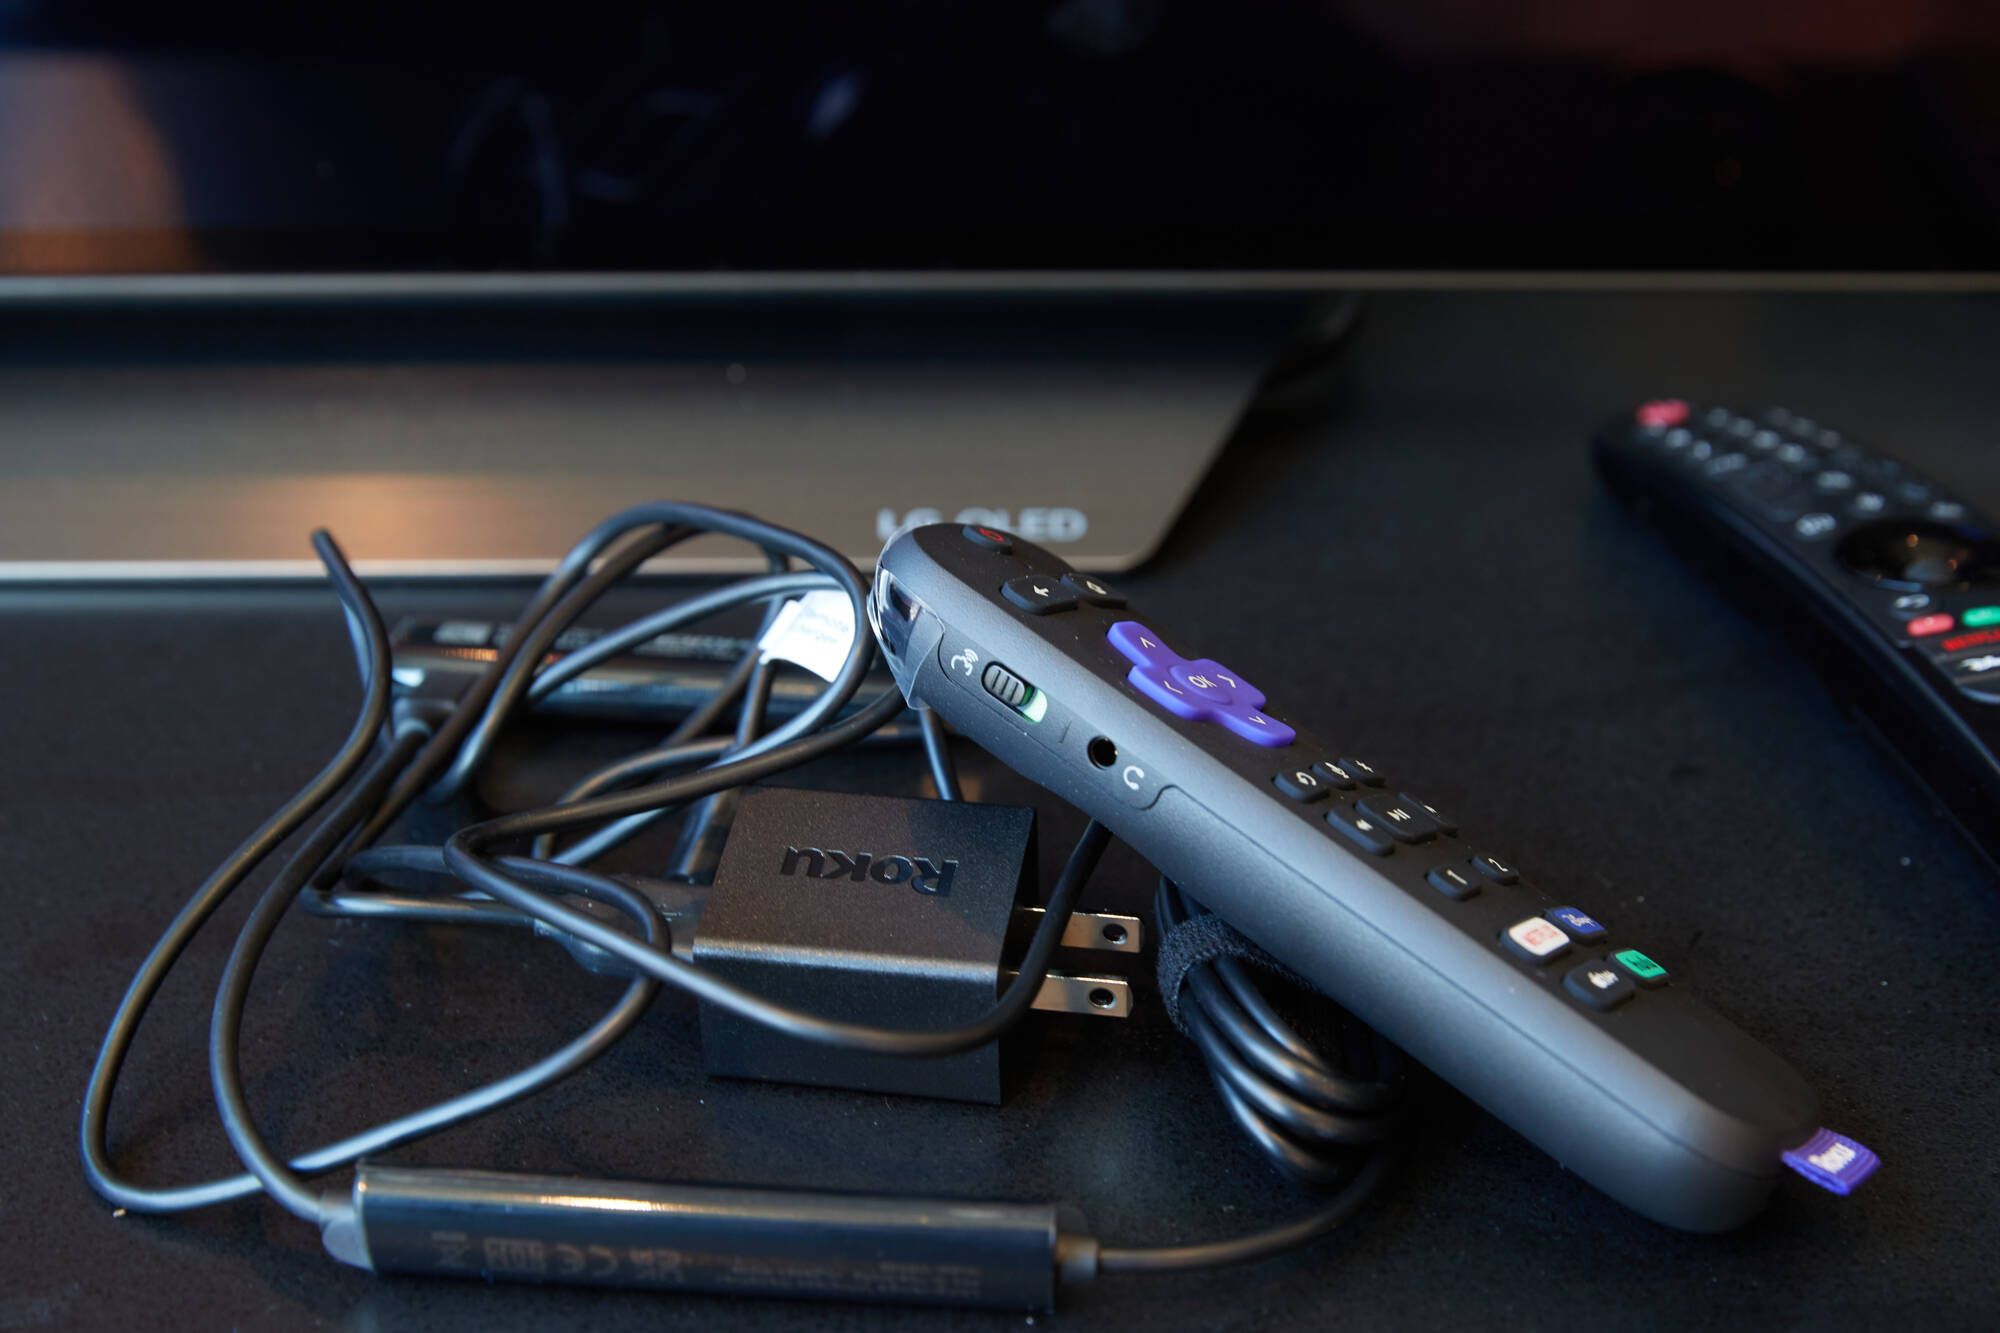 Roku vs Fire Stick, which is better?